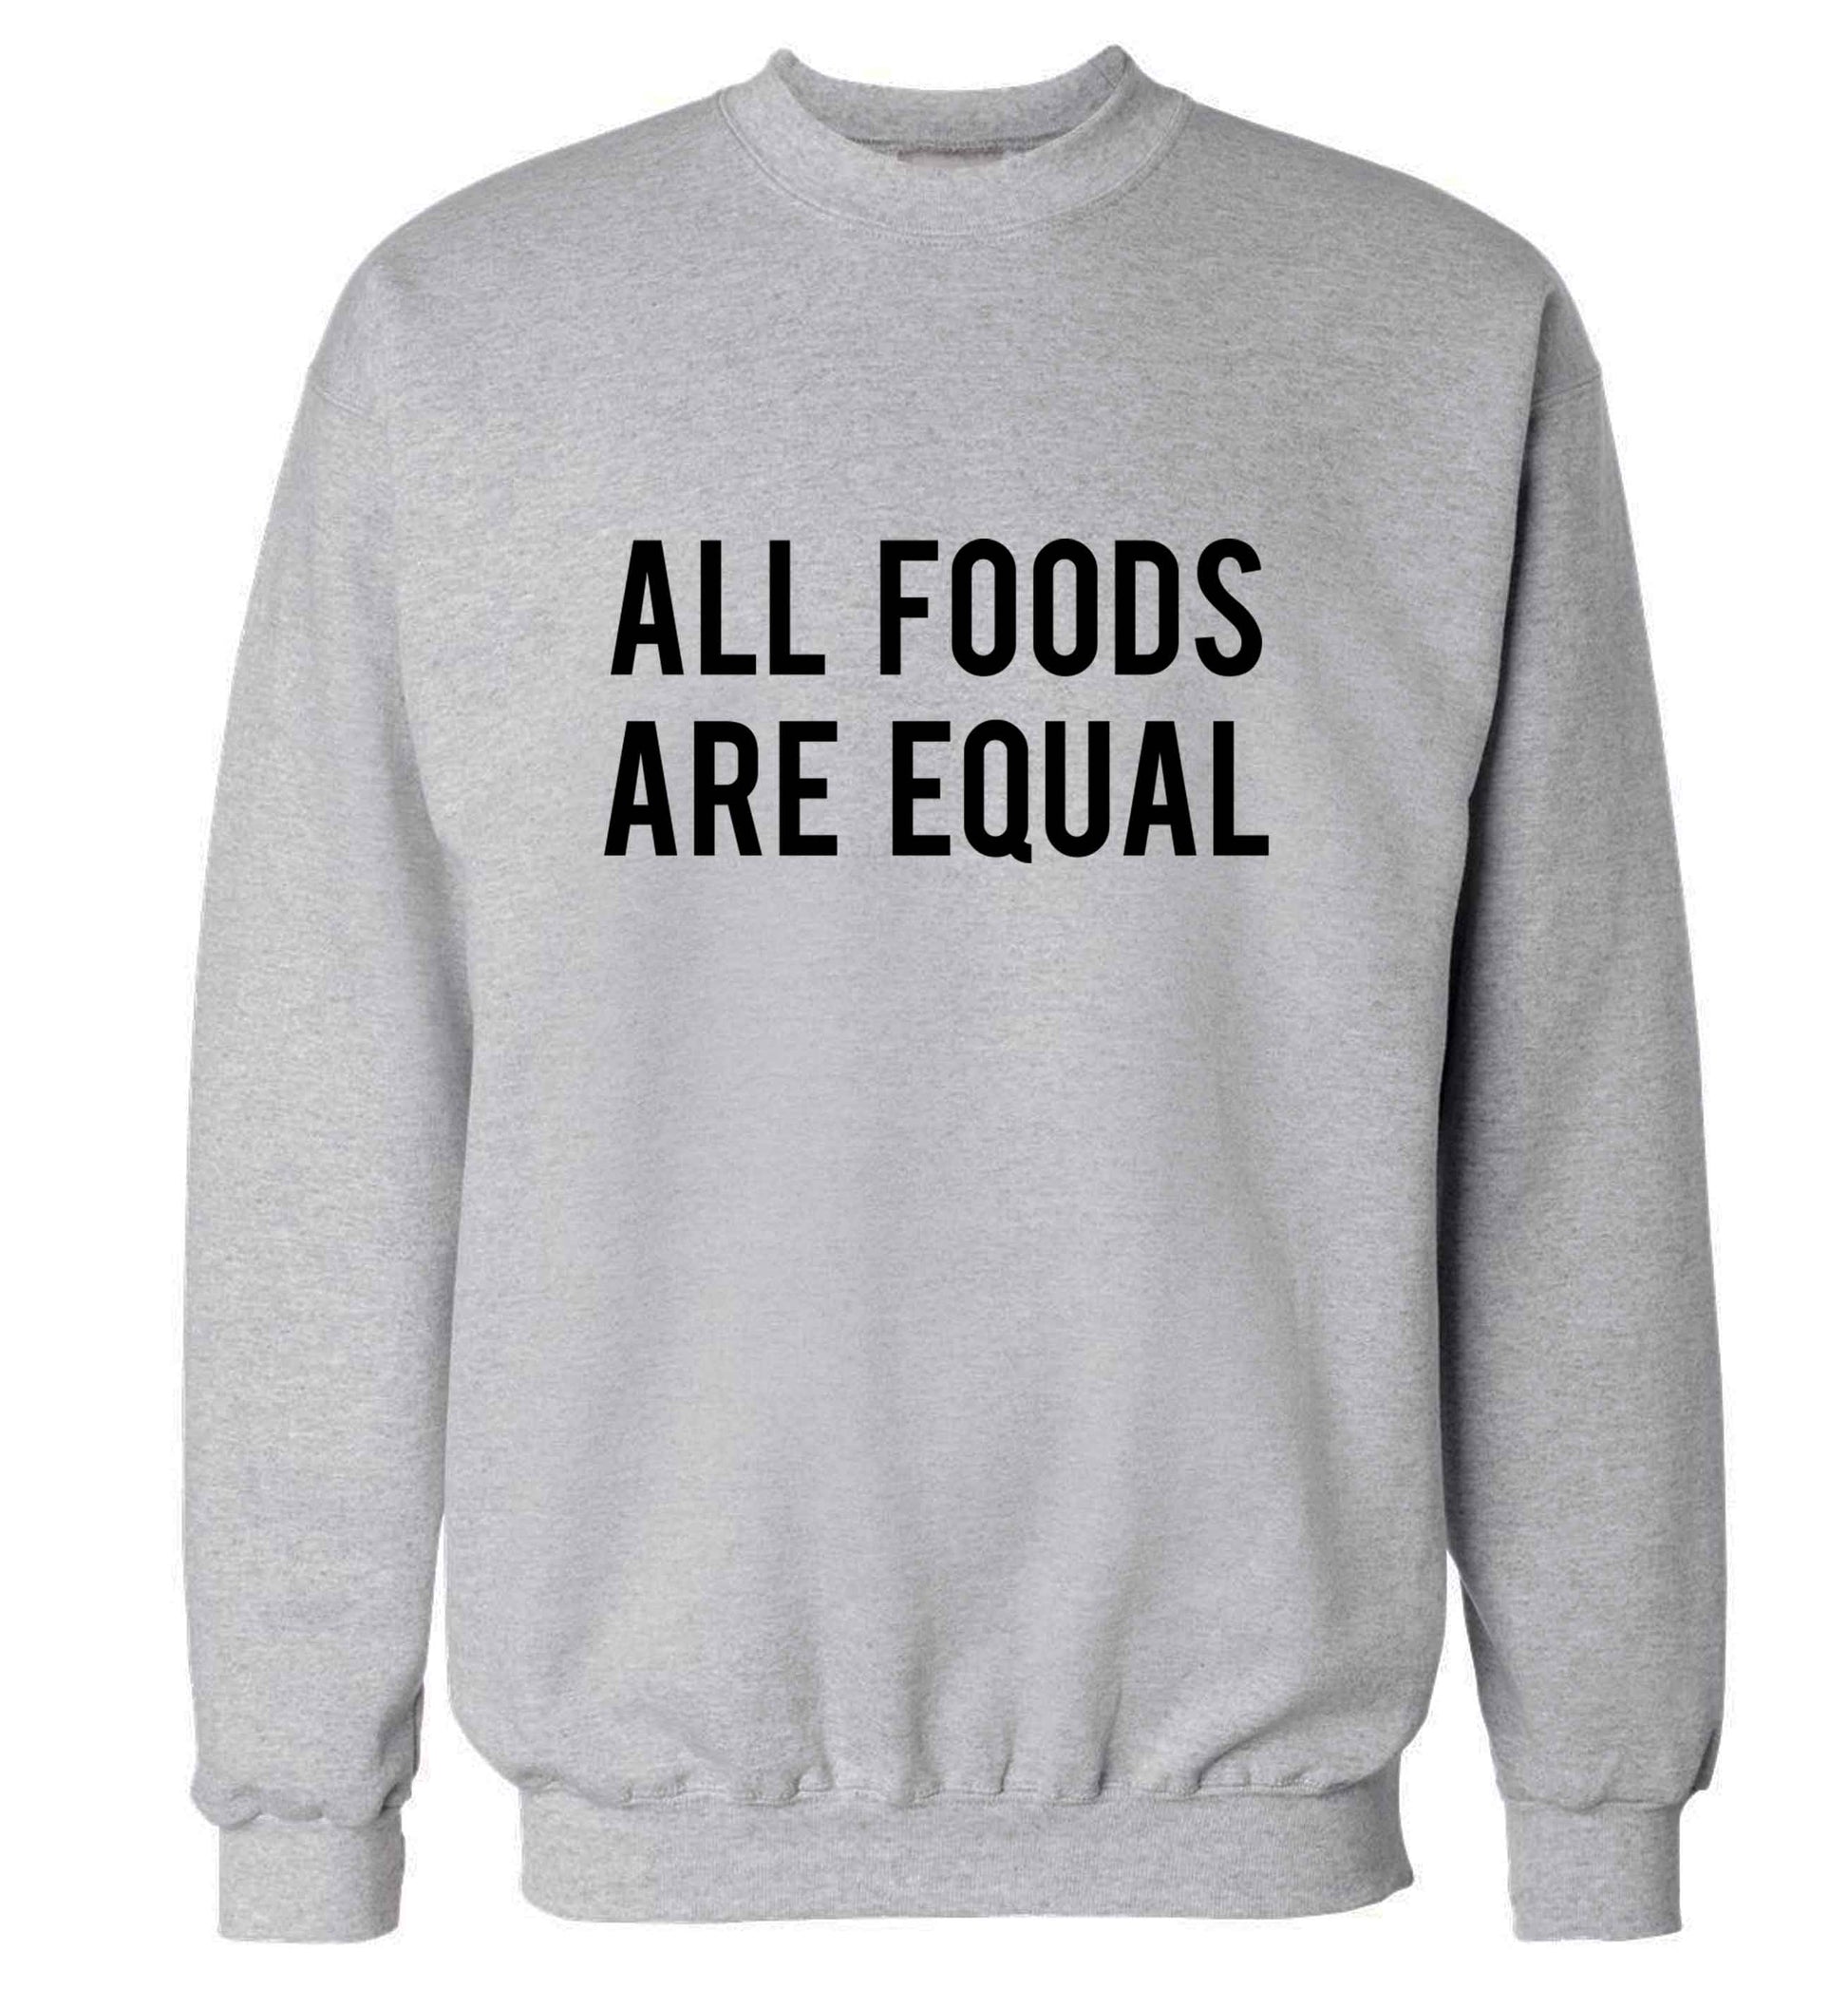 All foods are equal adult's unisex grey sweater 2XL